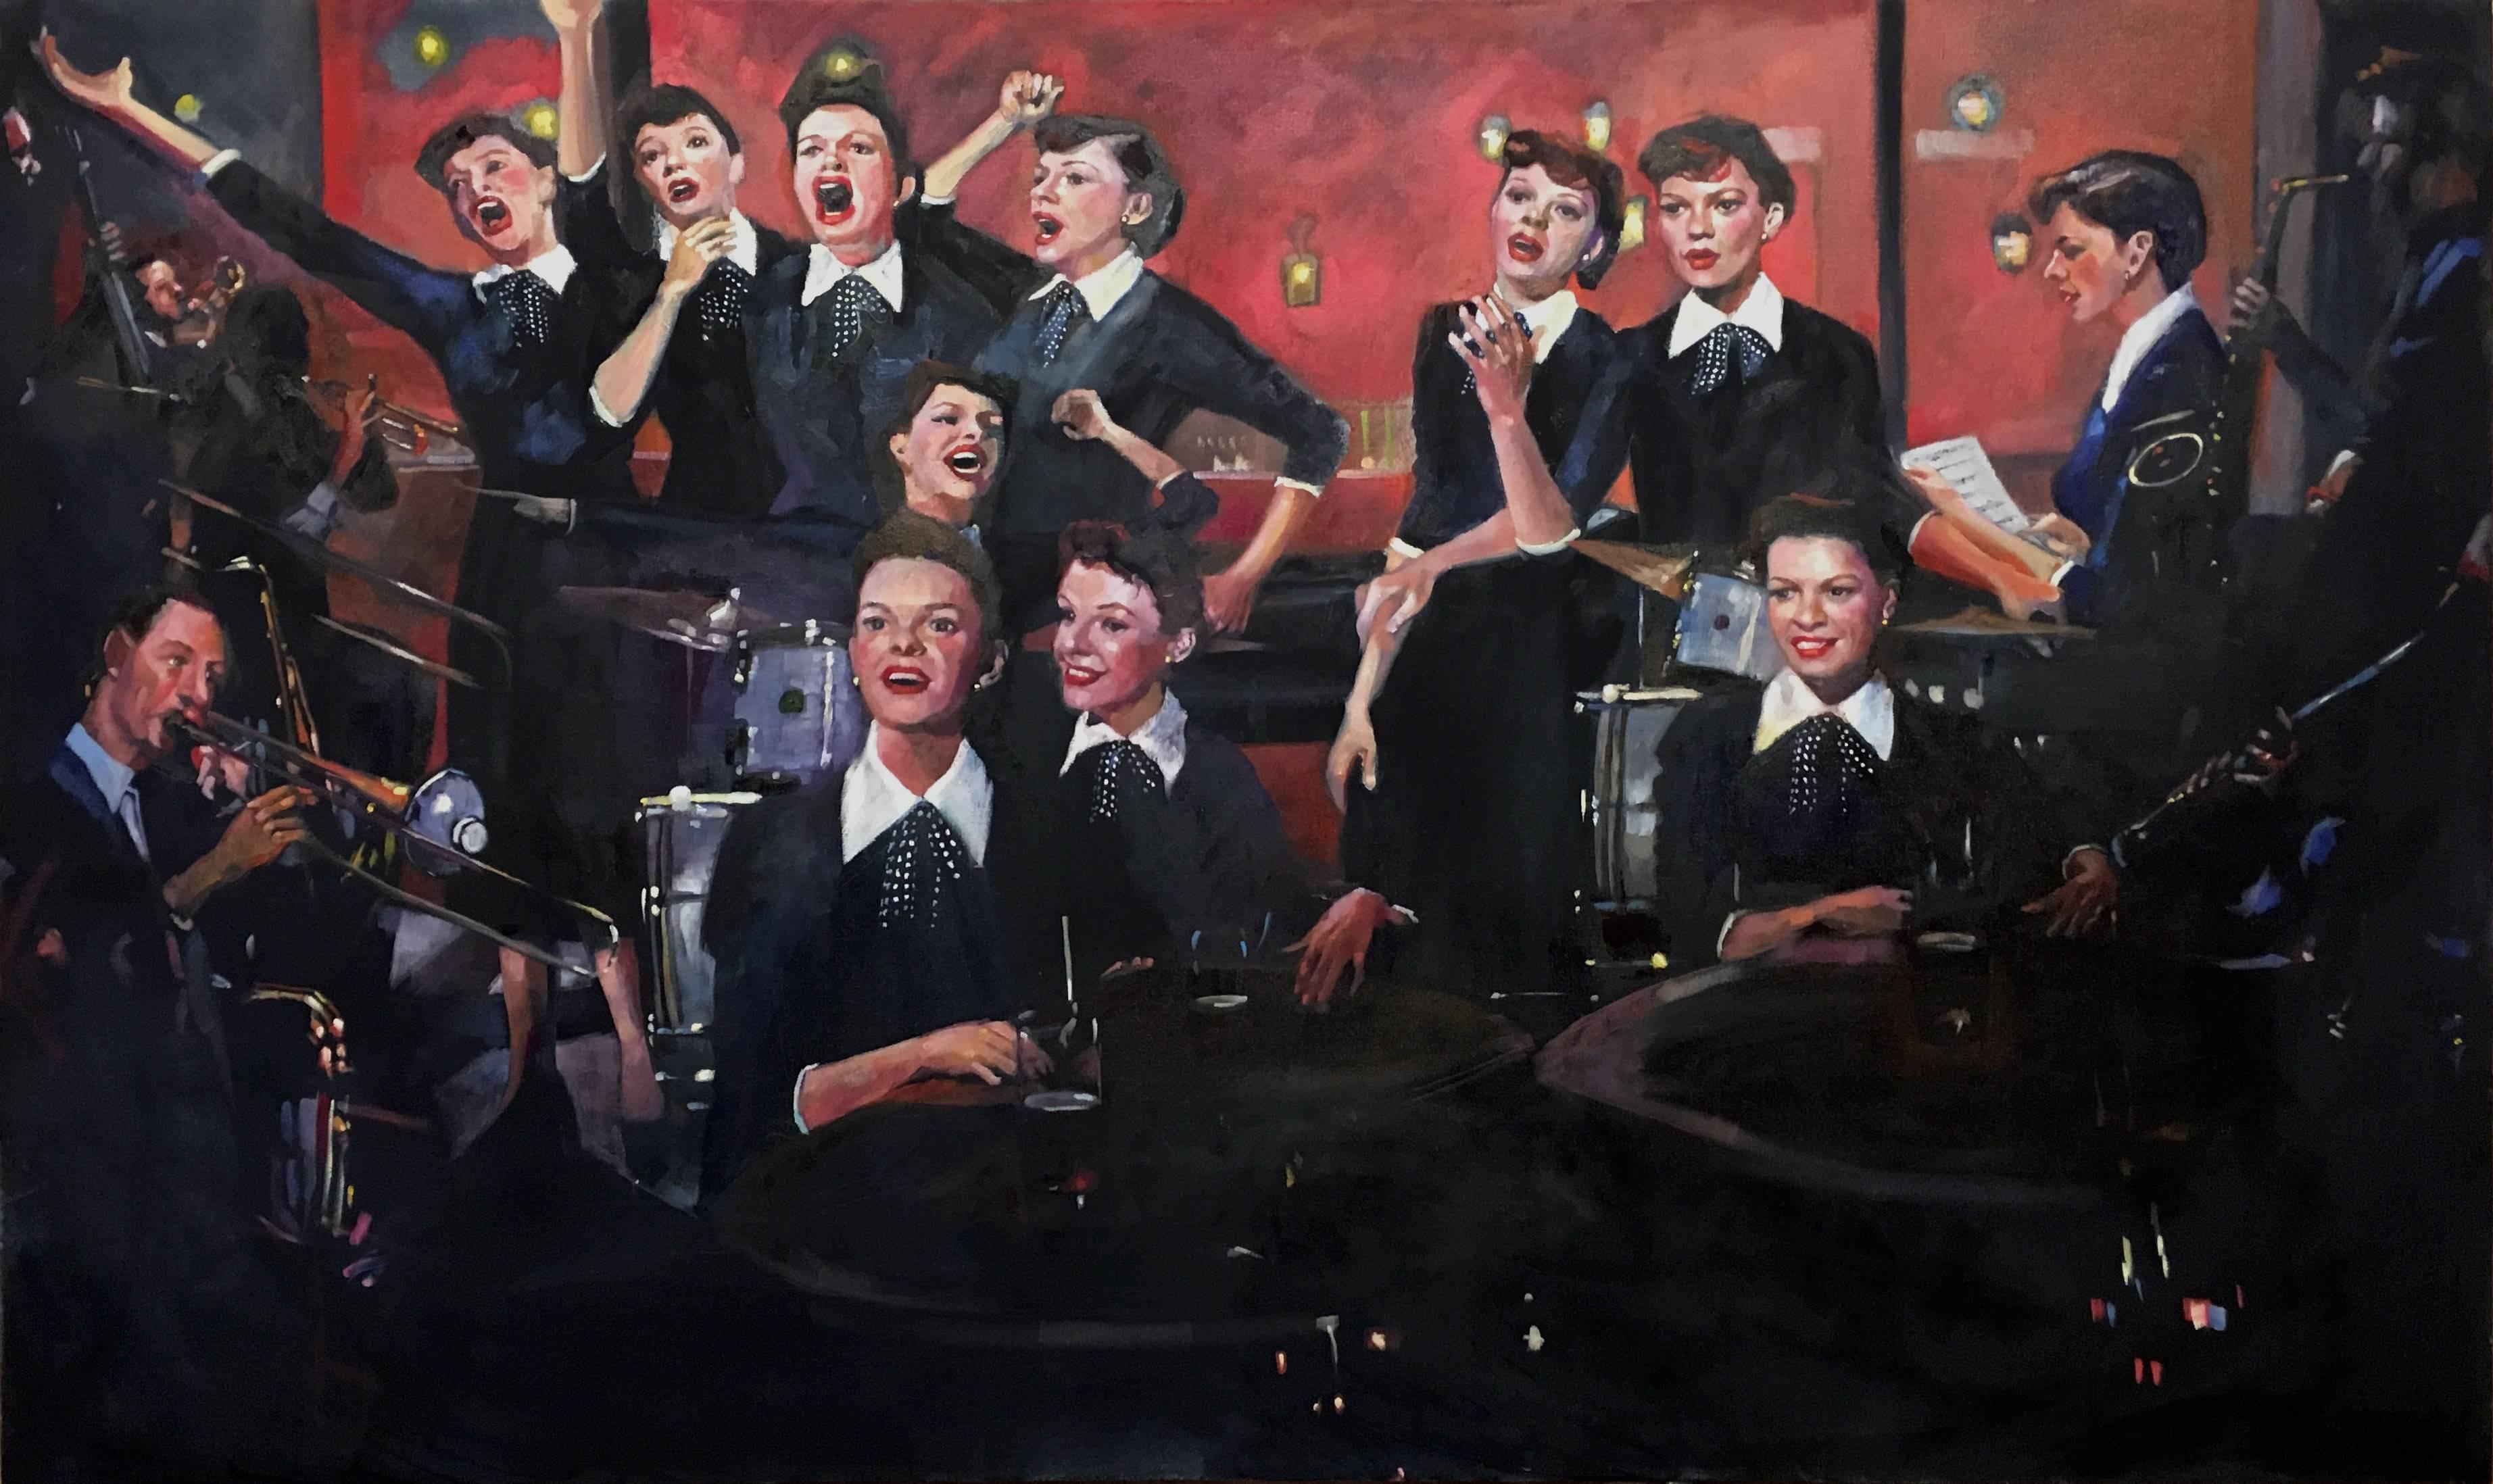 Carl Grauer Figurative Painting - The Man That Got Away (Contemporary Oil Painting about Judy Garland)